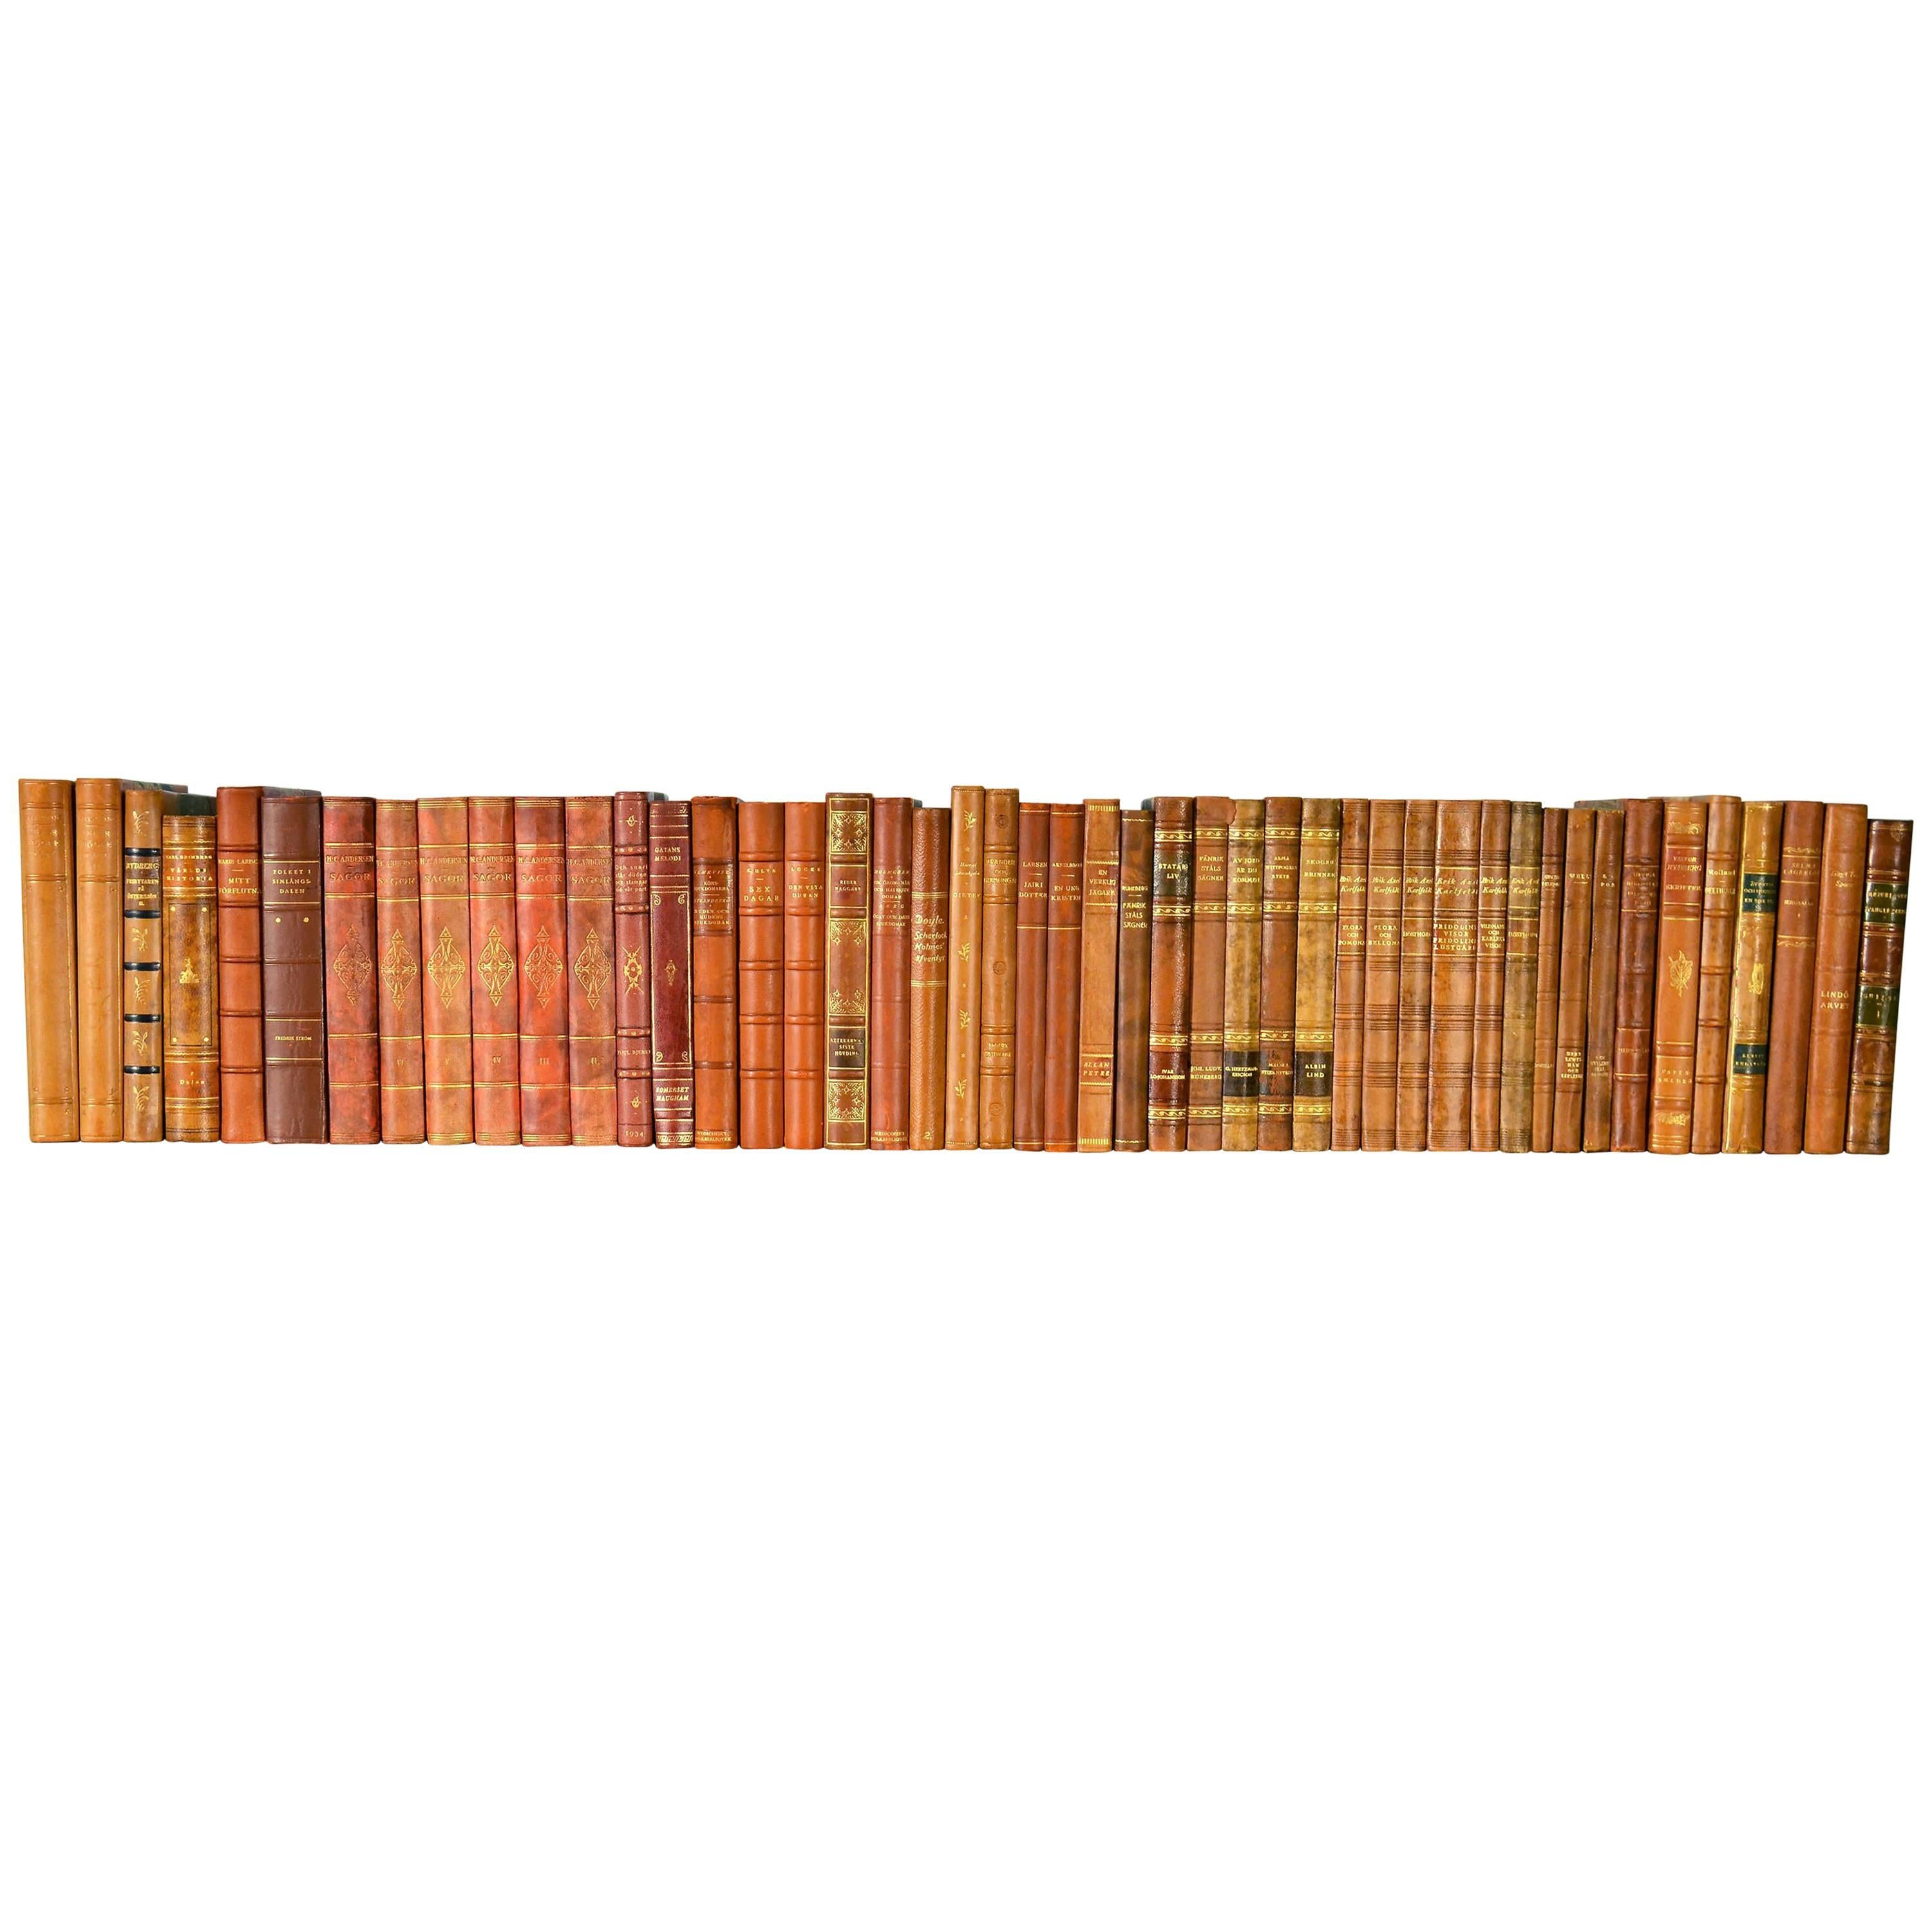 Collection of Leather Bound Books, Series 124